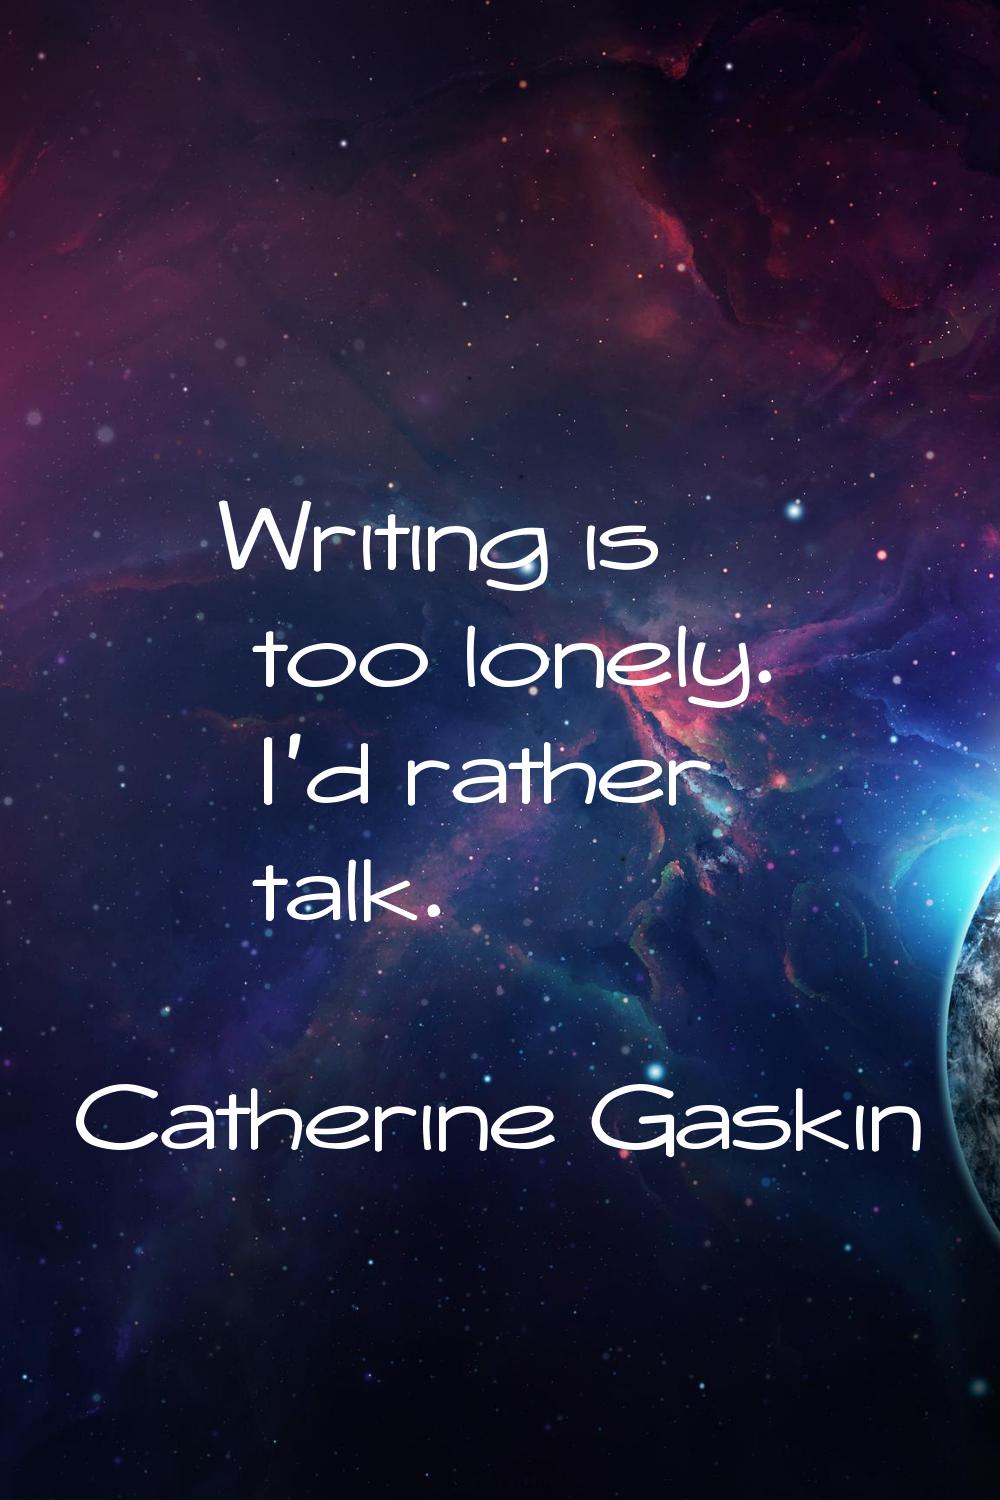 Writing is too lonely. I'd rather talk.